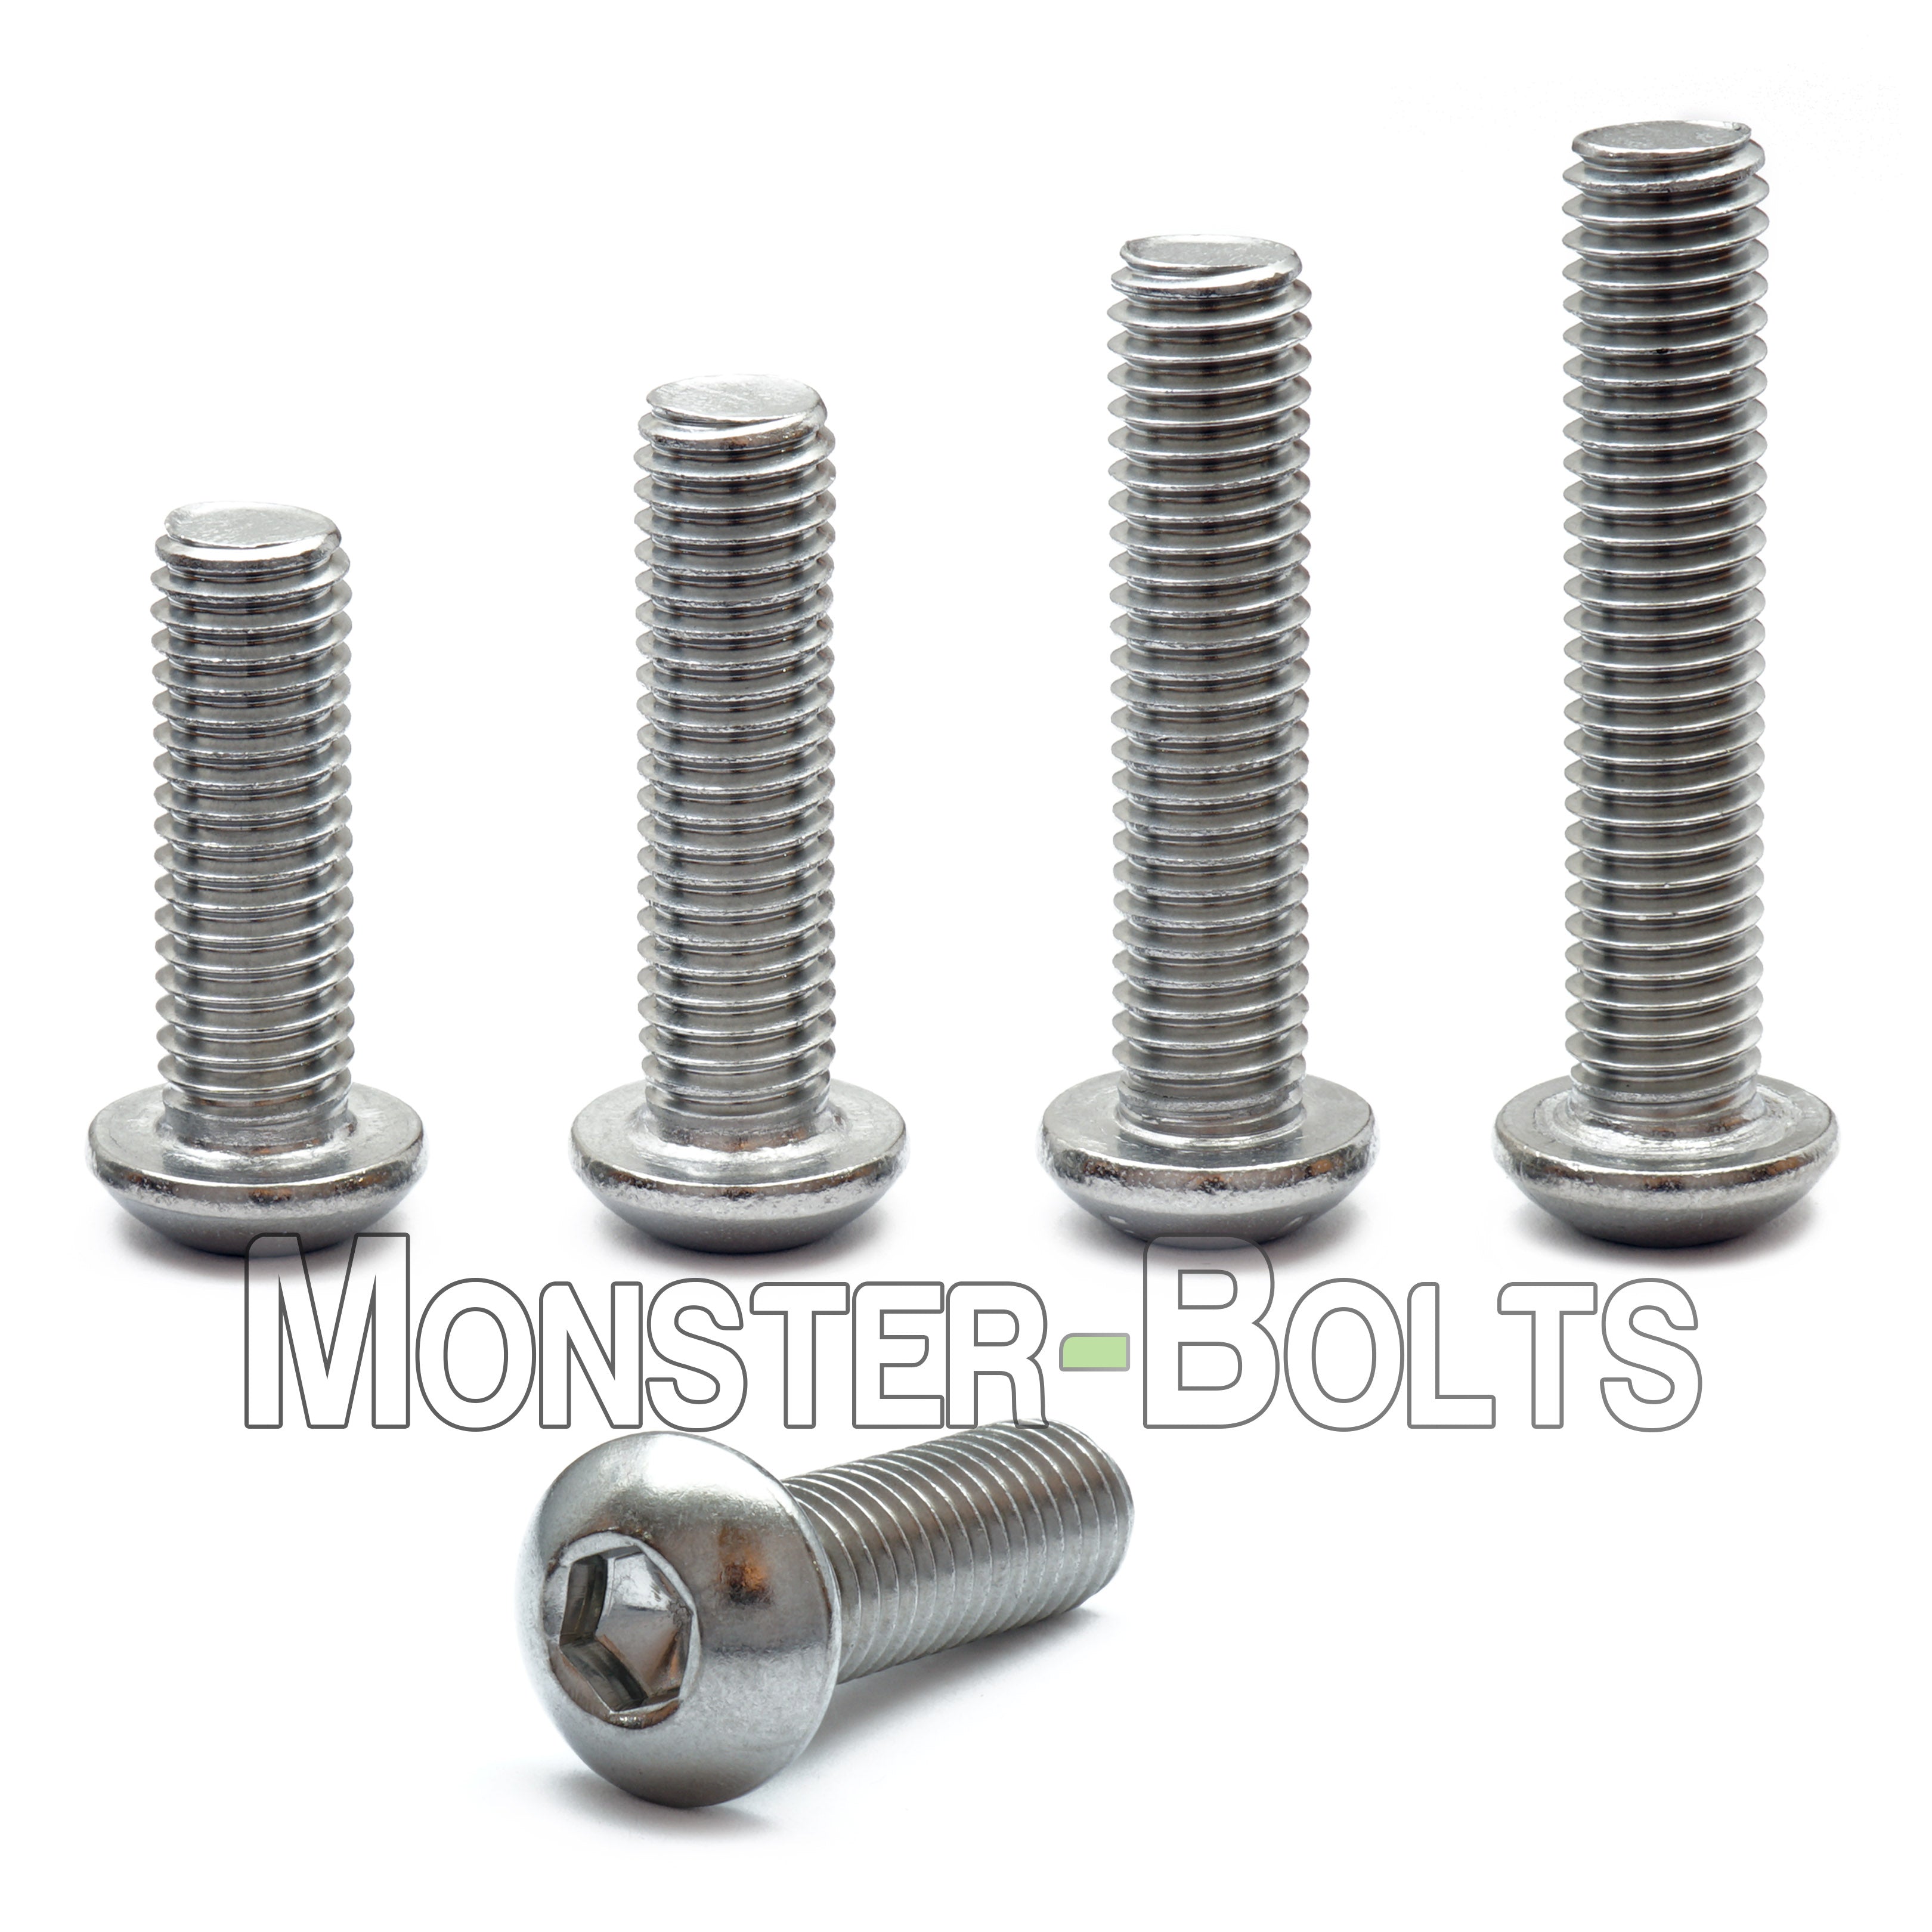 Stainless Steel BUTTON HEAD Socket Cap Screws ISO 7380 Qty 10 M6-1.0 x 10mm 